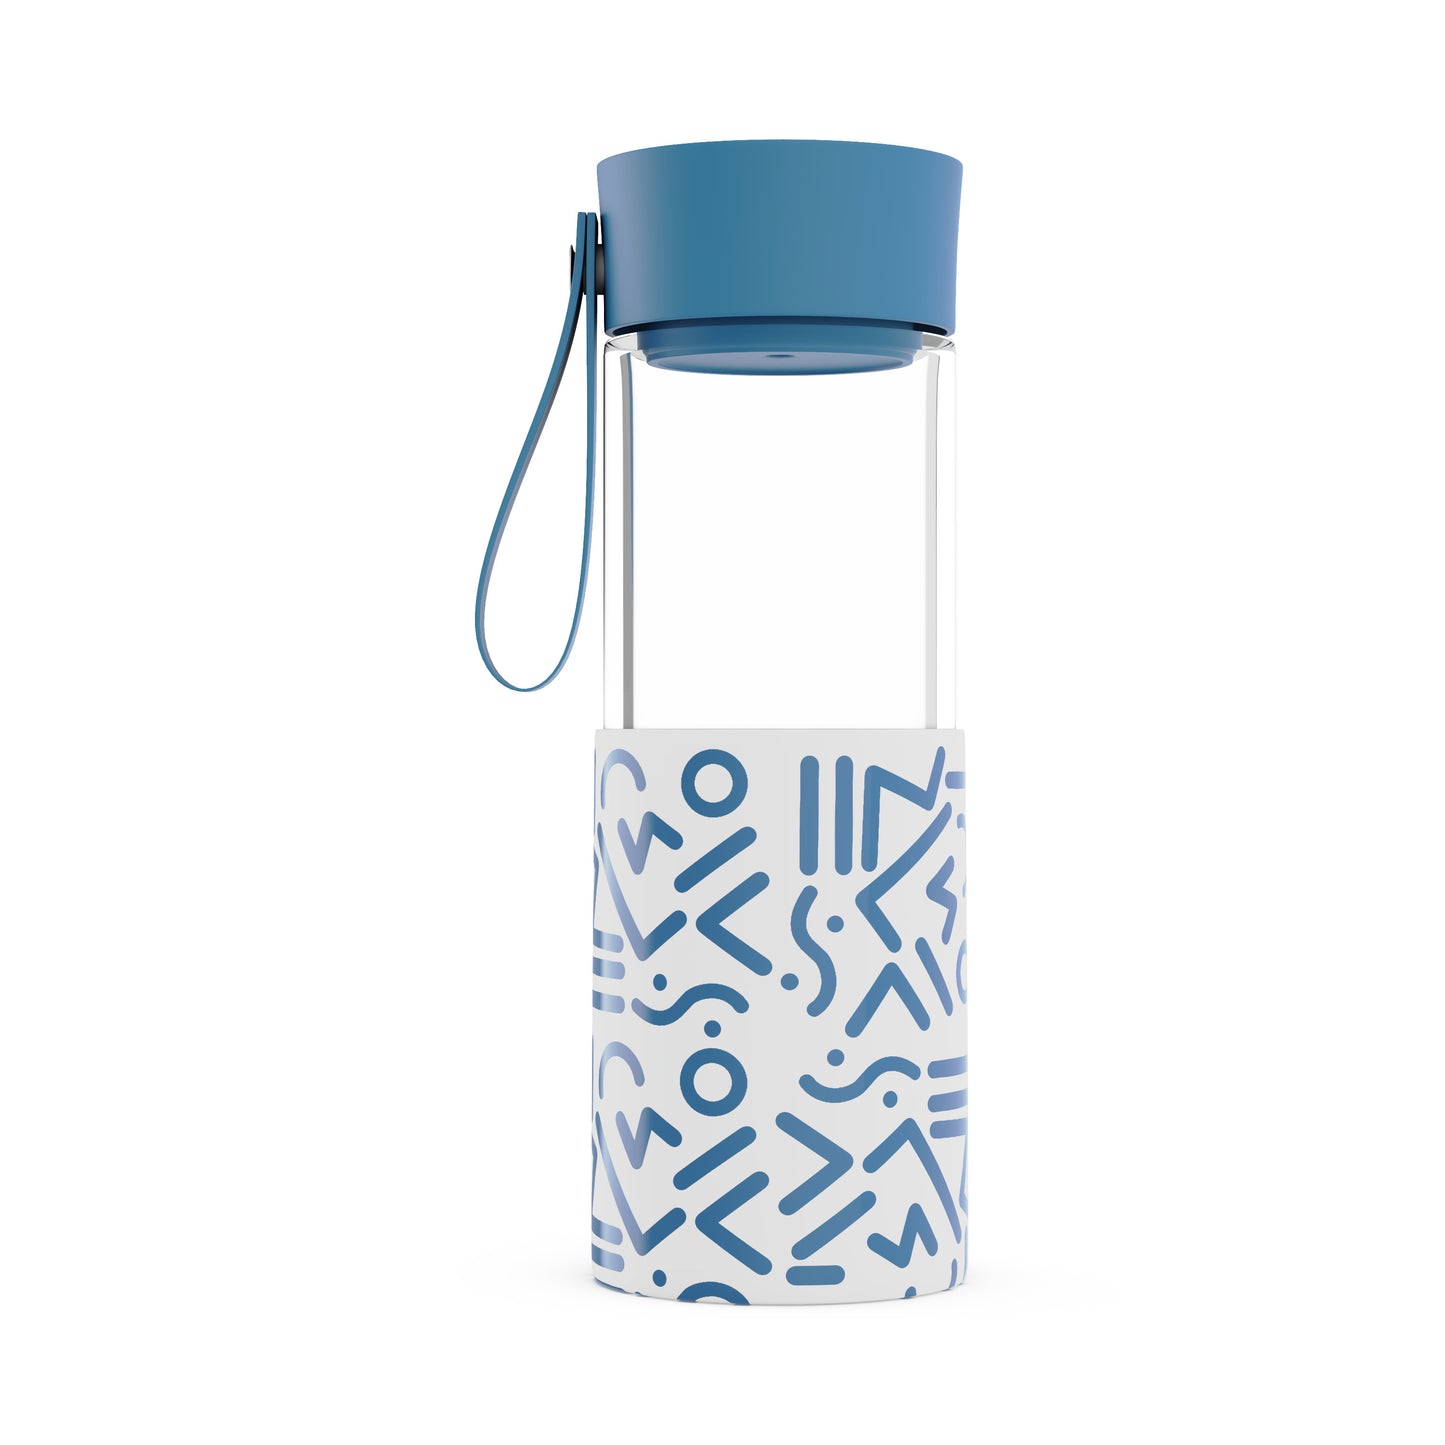 WAFE Cup - Insulated Glass 350ml - BLUE